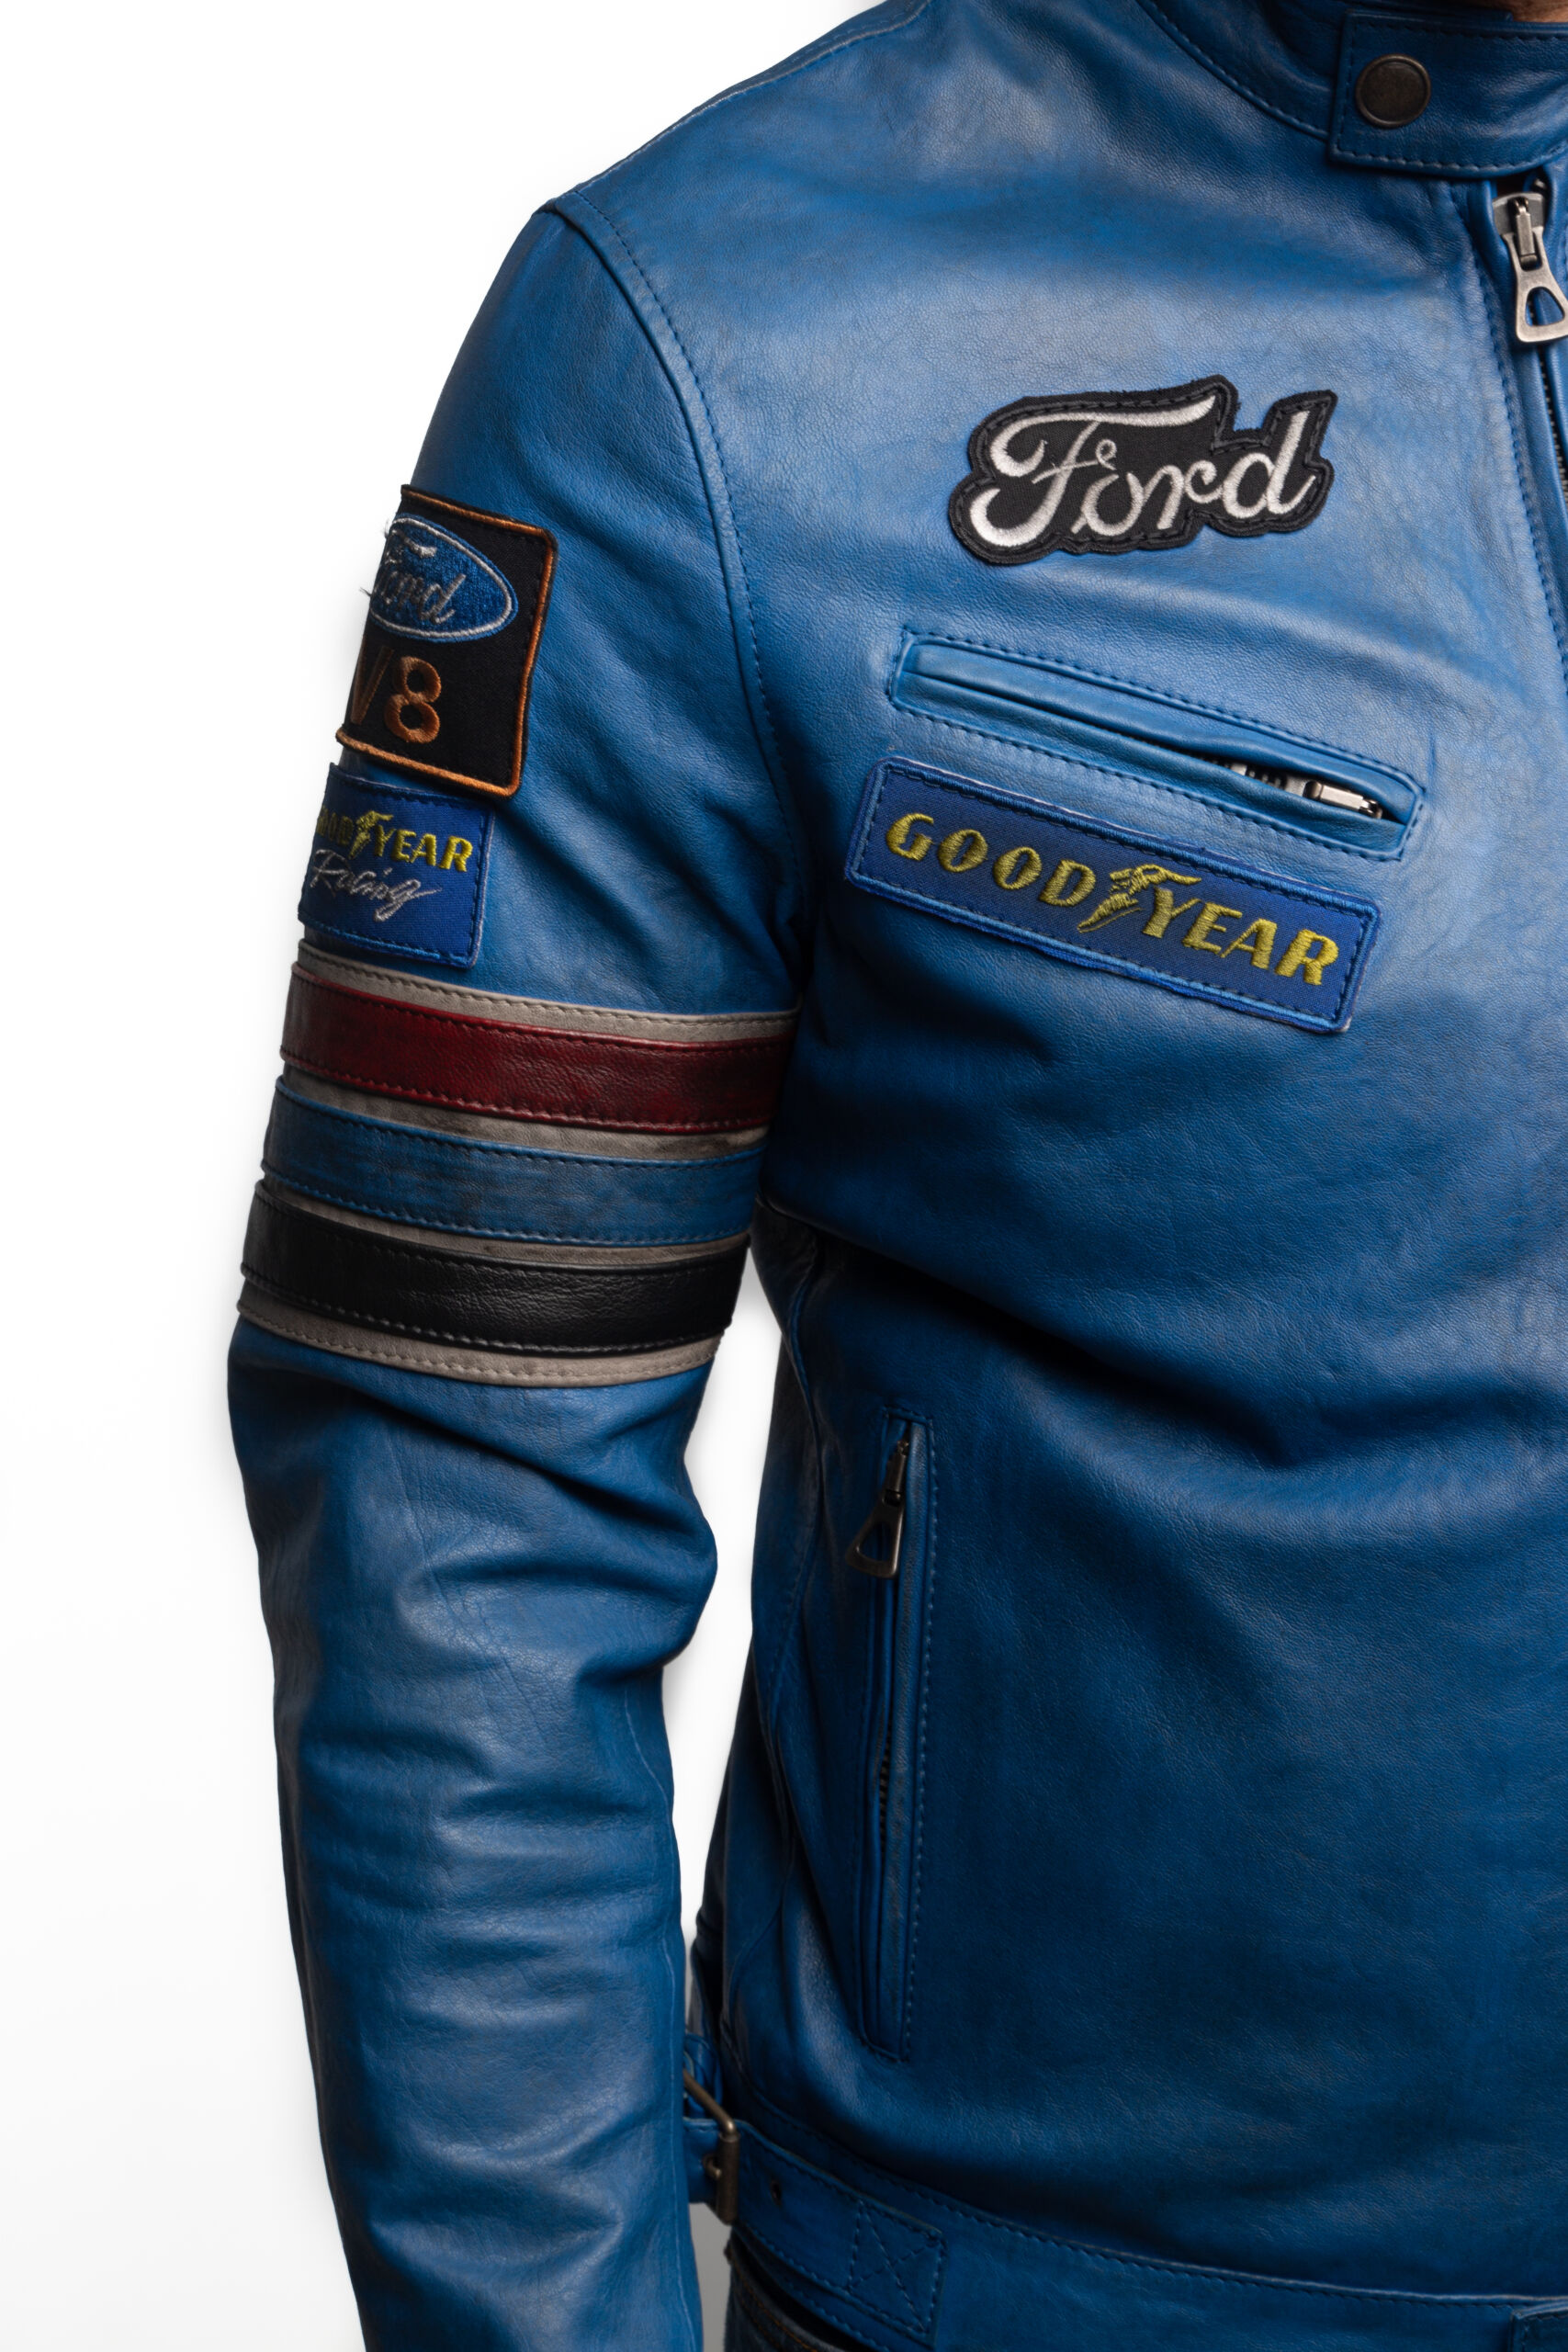 MUSTANG SHELBY Inspired | Black / Blue Tribute - Hollywood Vintage Jacket